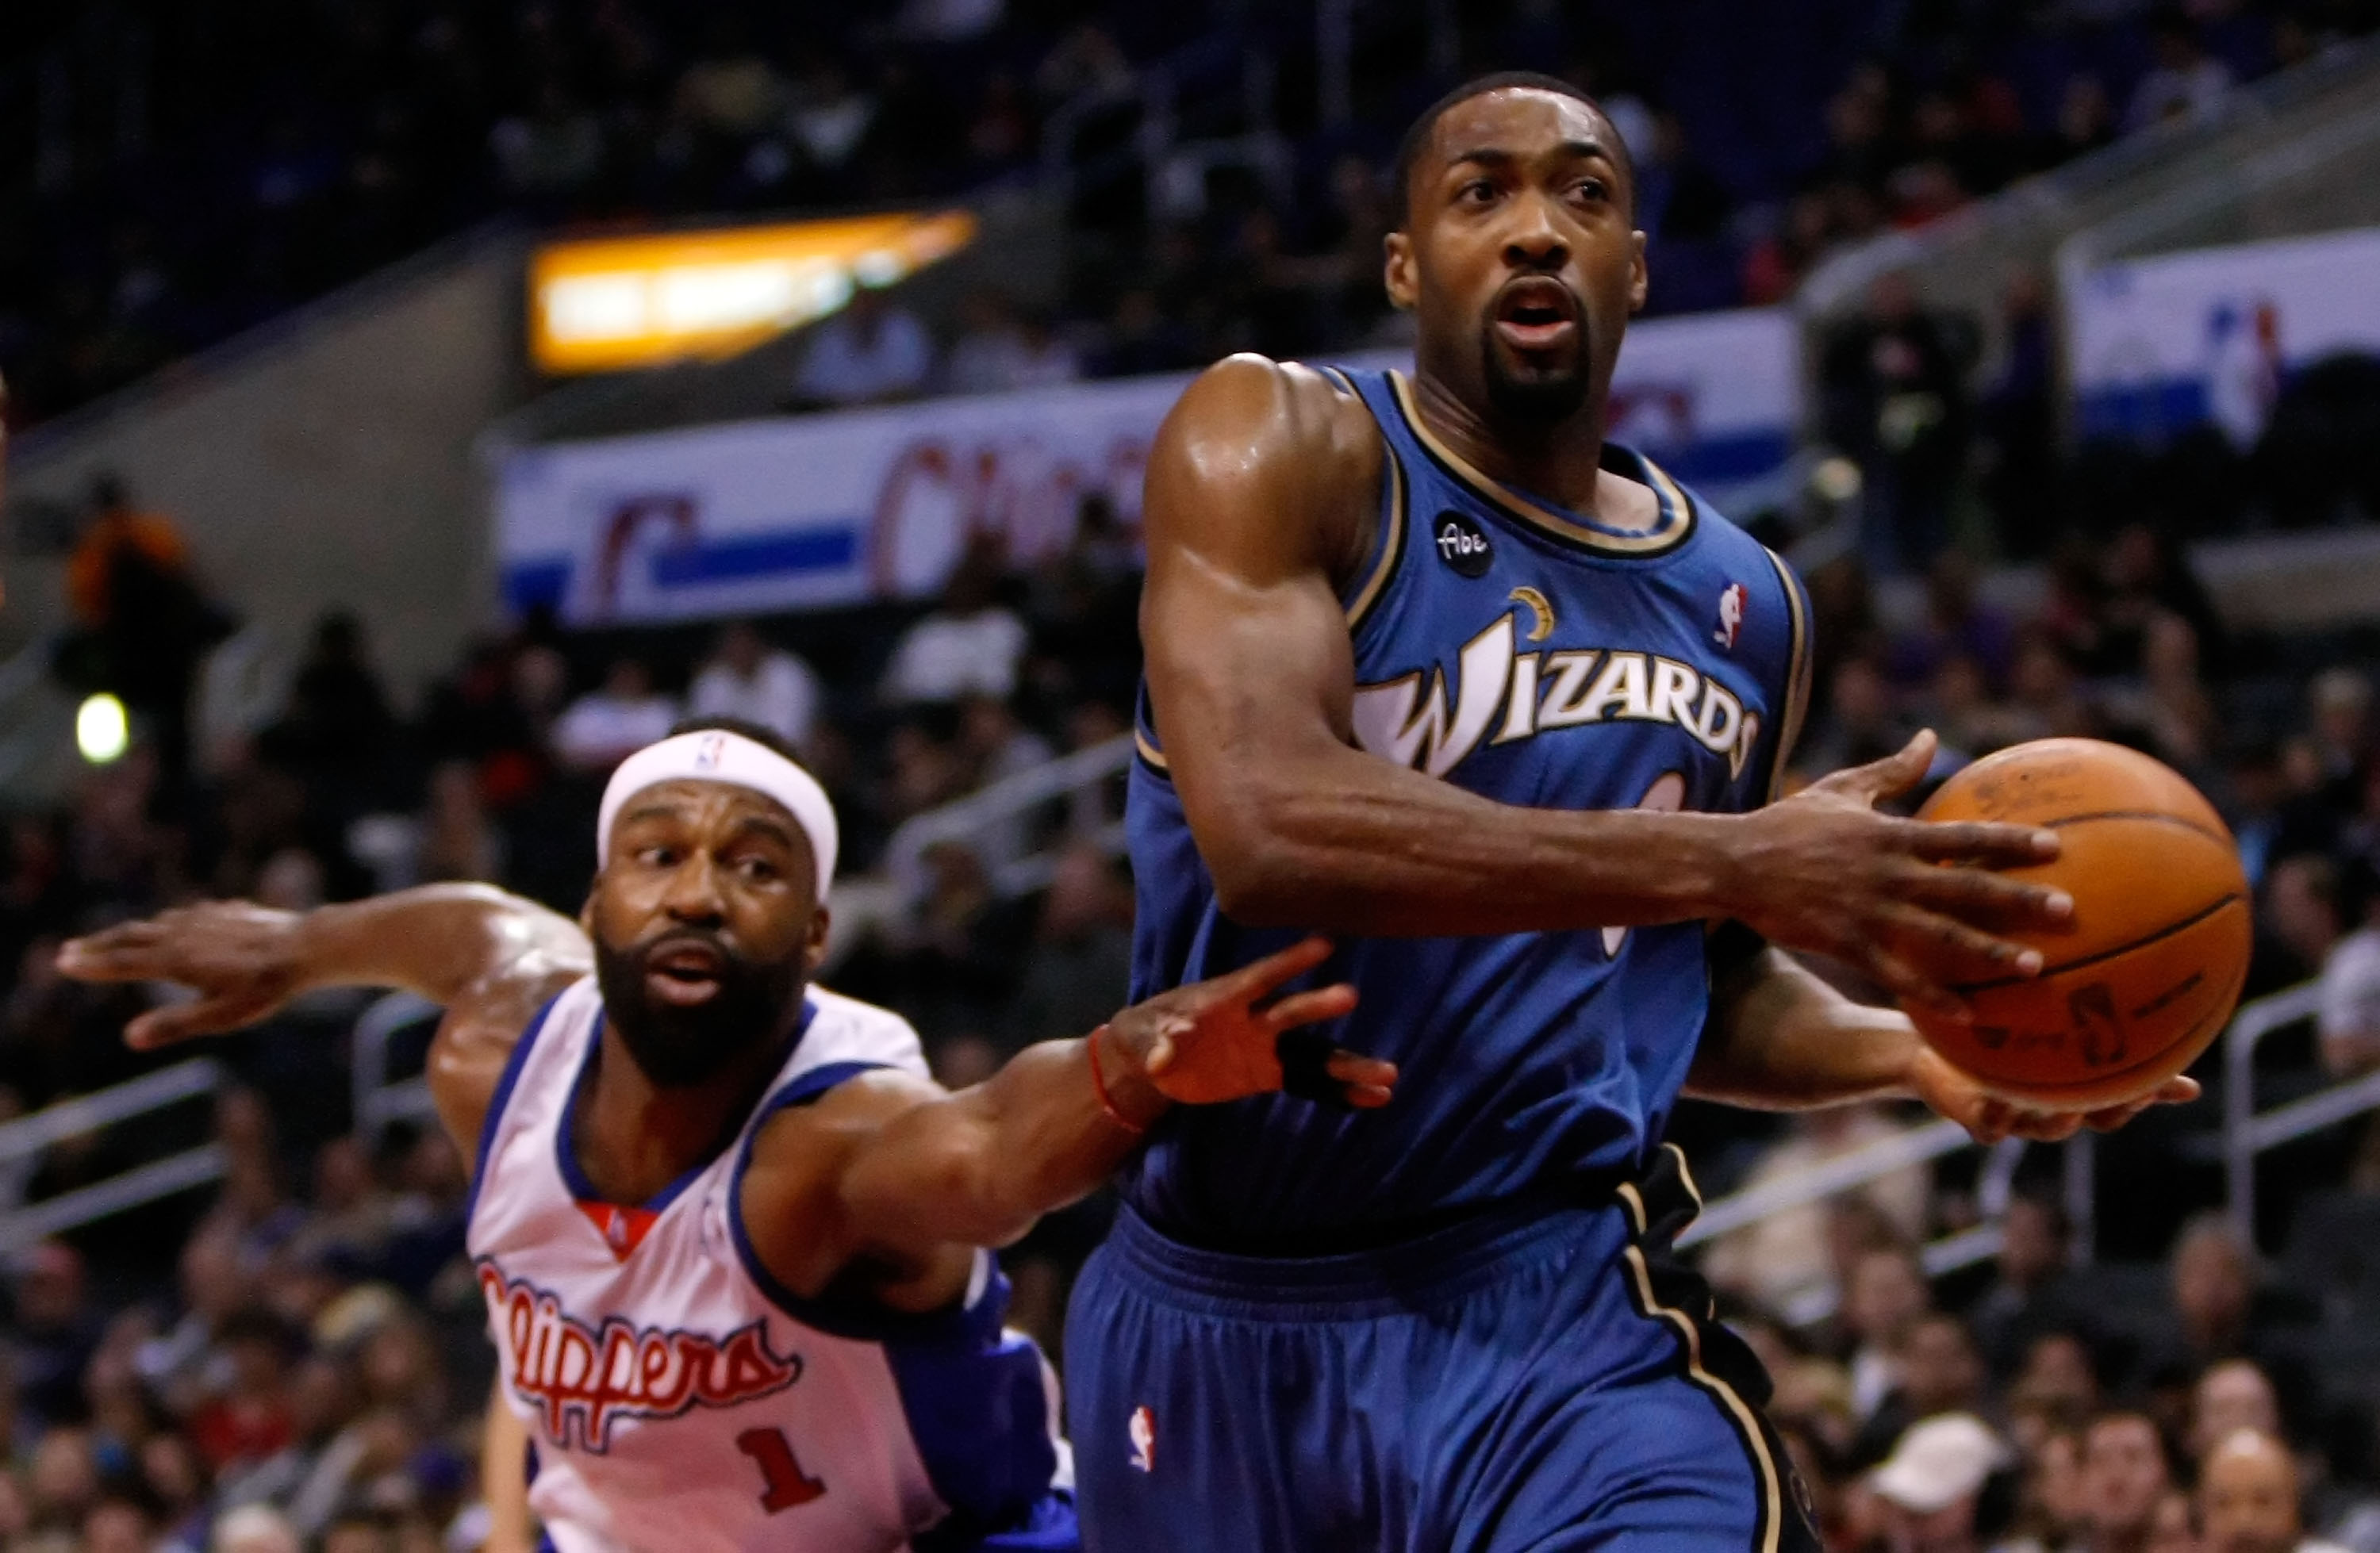 Gilbert Arenas (0) of the Washington Wizards drives to the basket